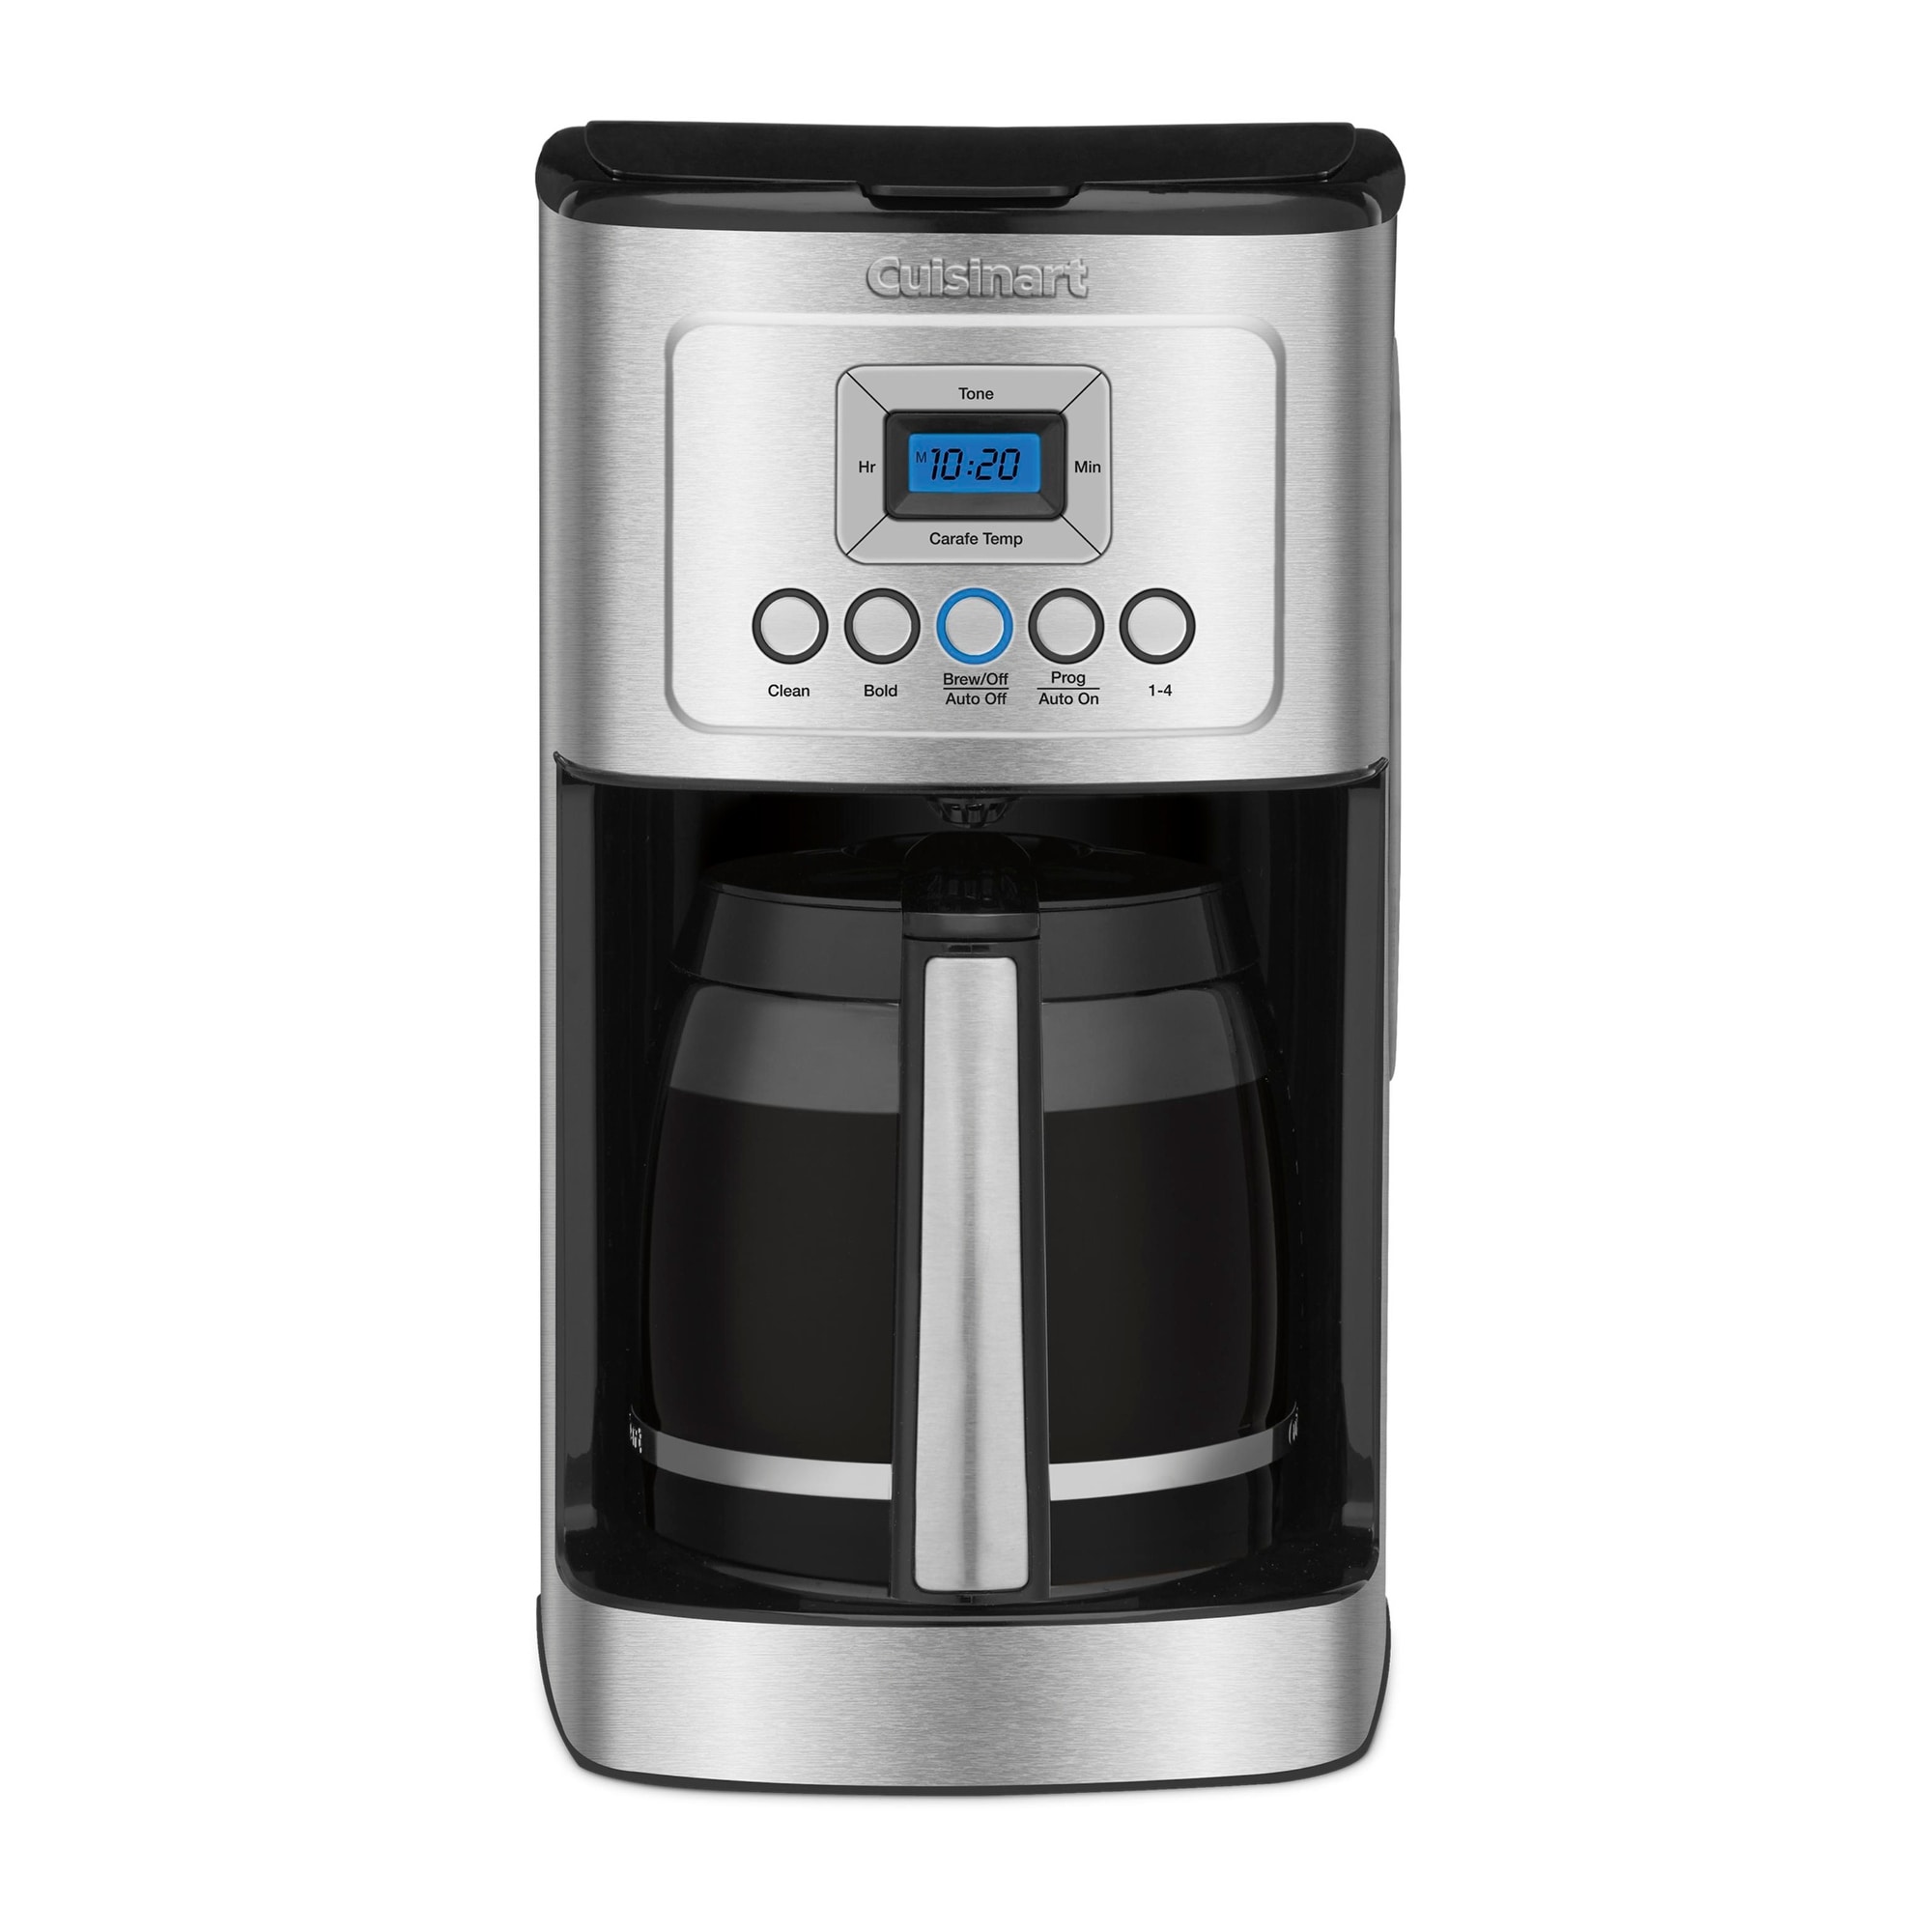 Cuisinart Coffee Bar Coffee Grinder Model DCG-20, White, NEW in